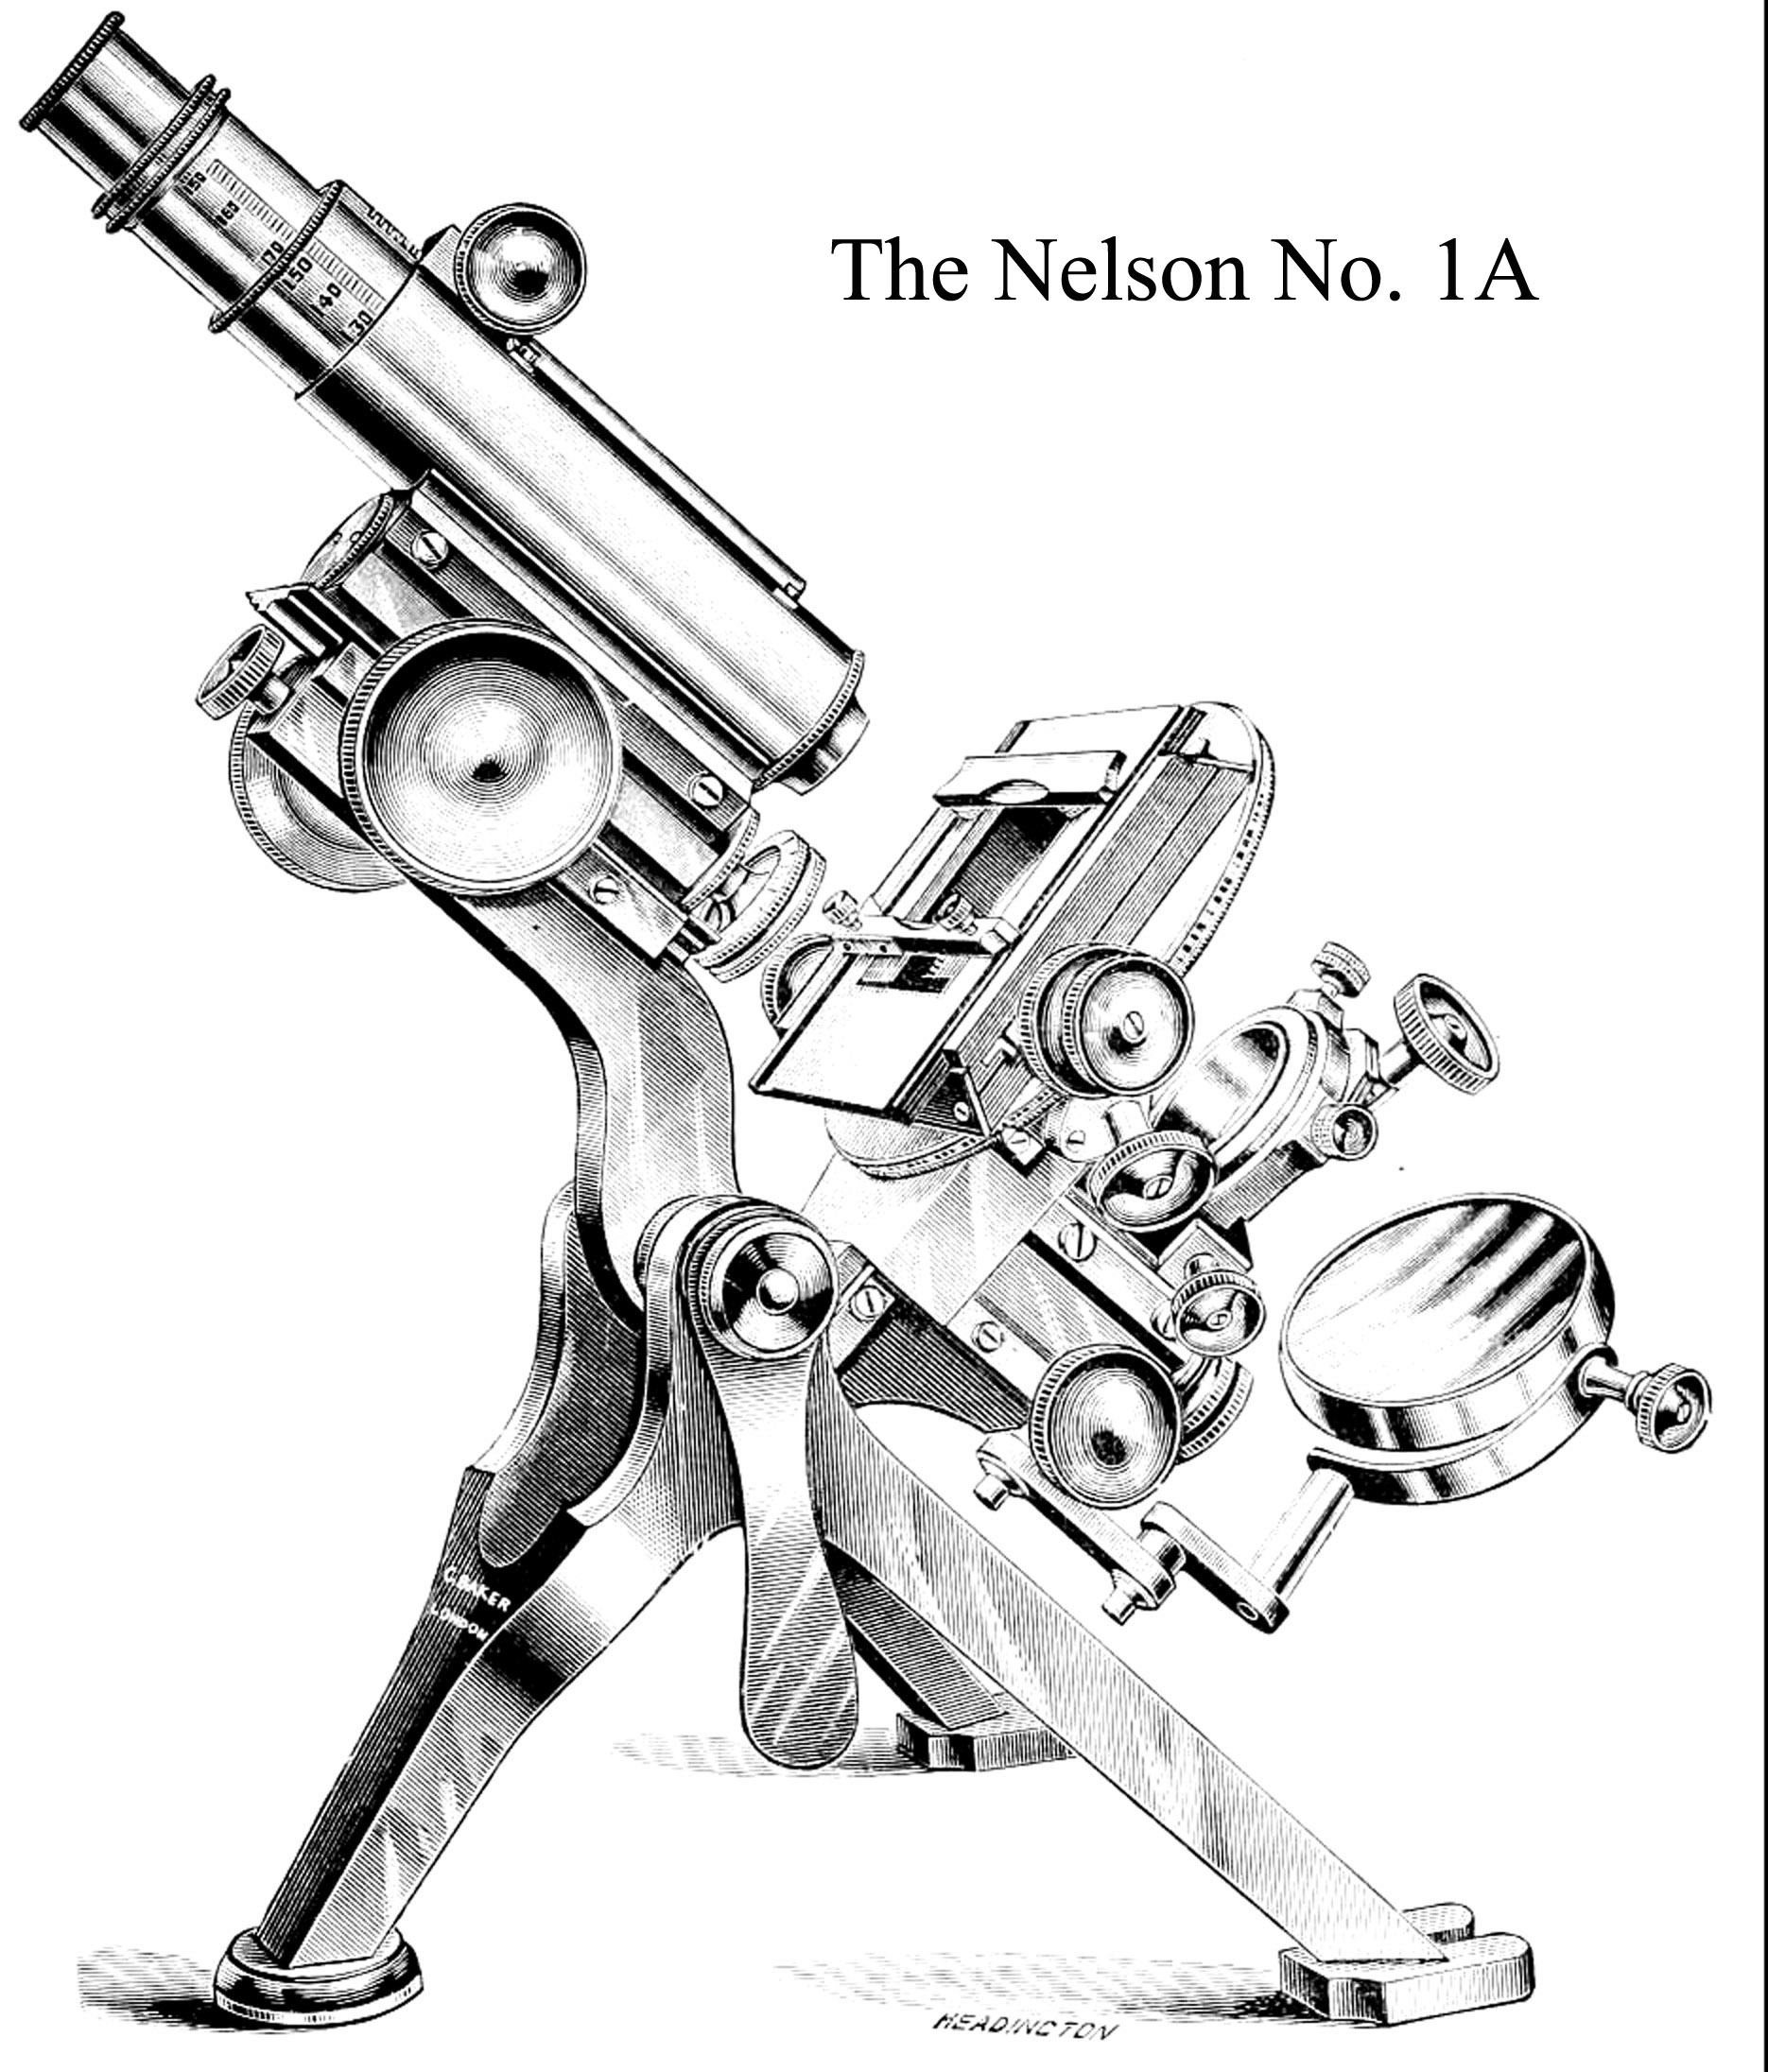 Illustration of the Nelson No 1 microscope from Carpenter
of 1901